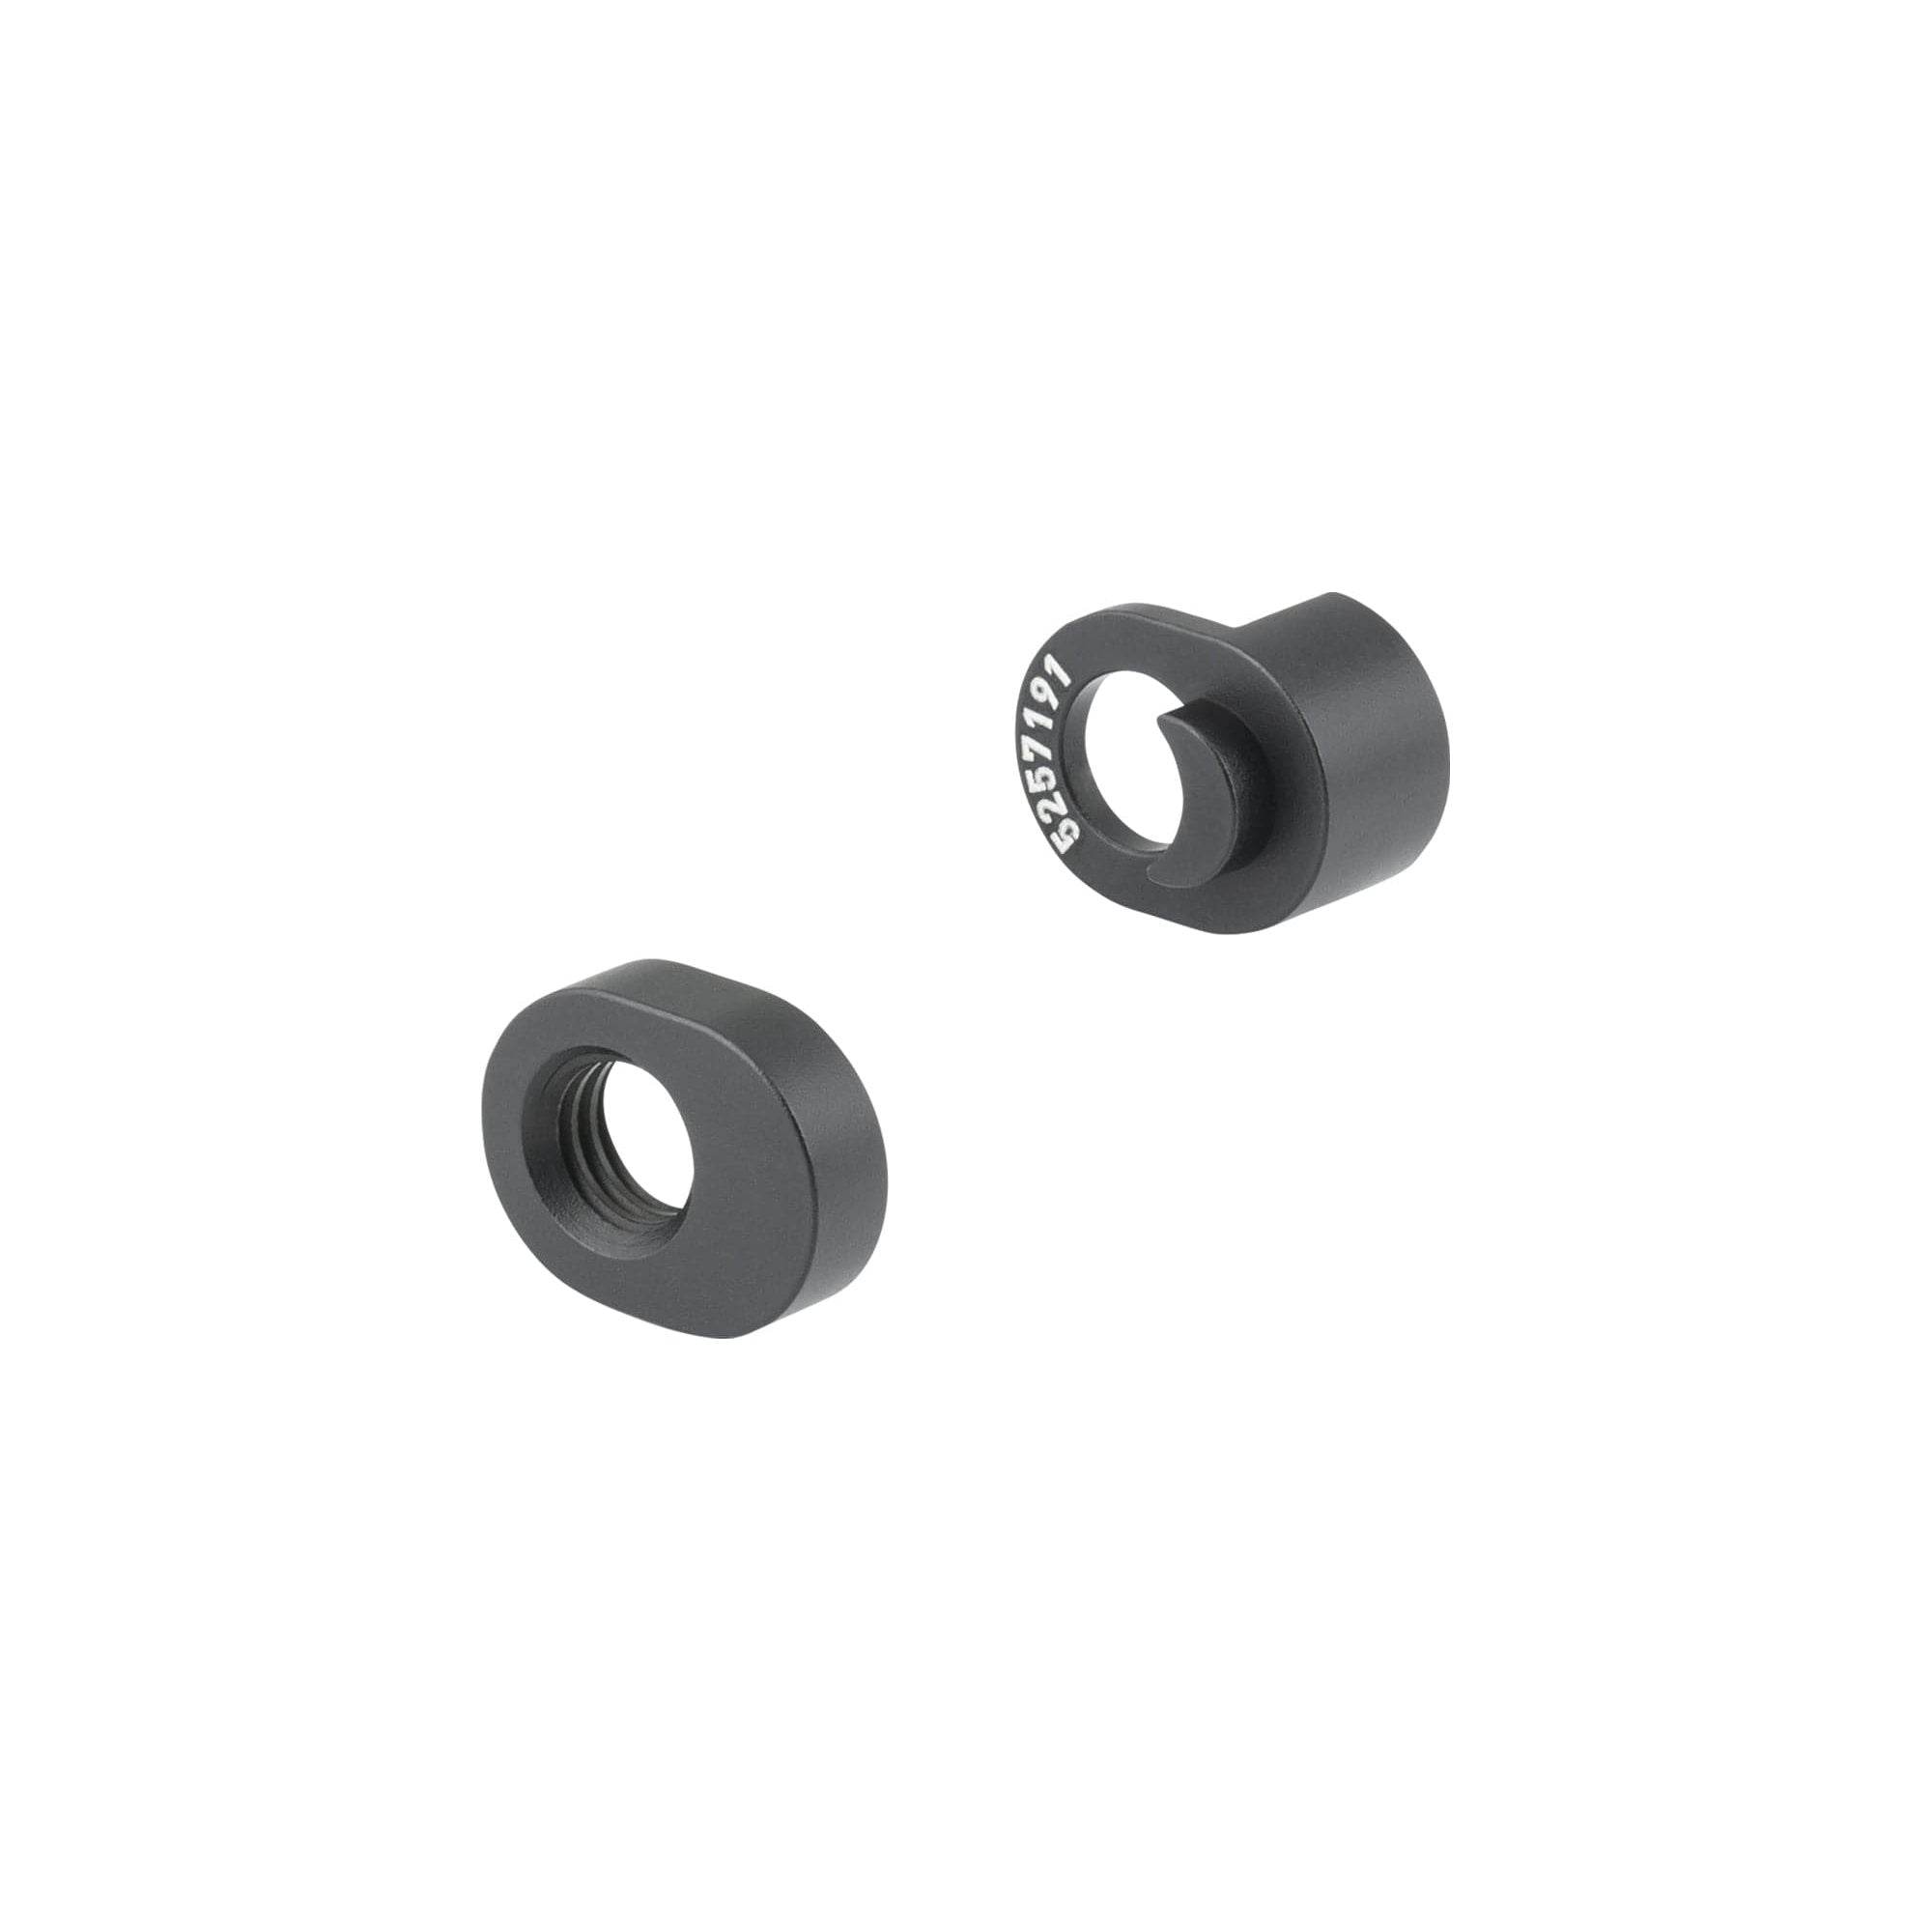 Trek 2022 Top Fuel 29 Lower Shock Mino Nut and Washer Kit